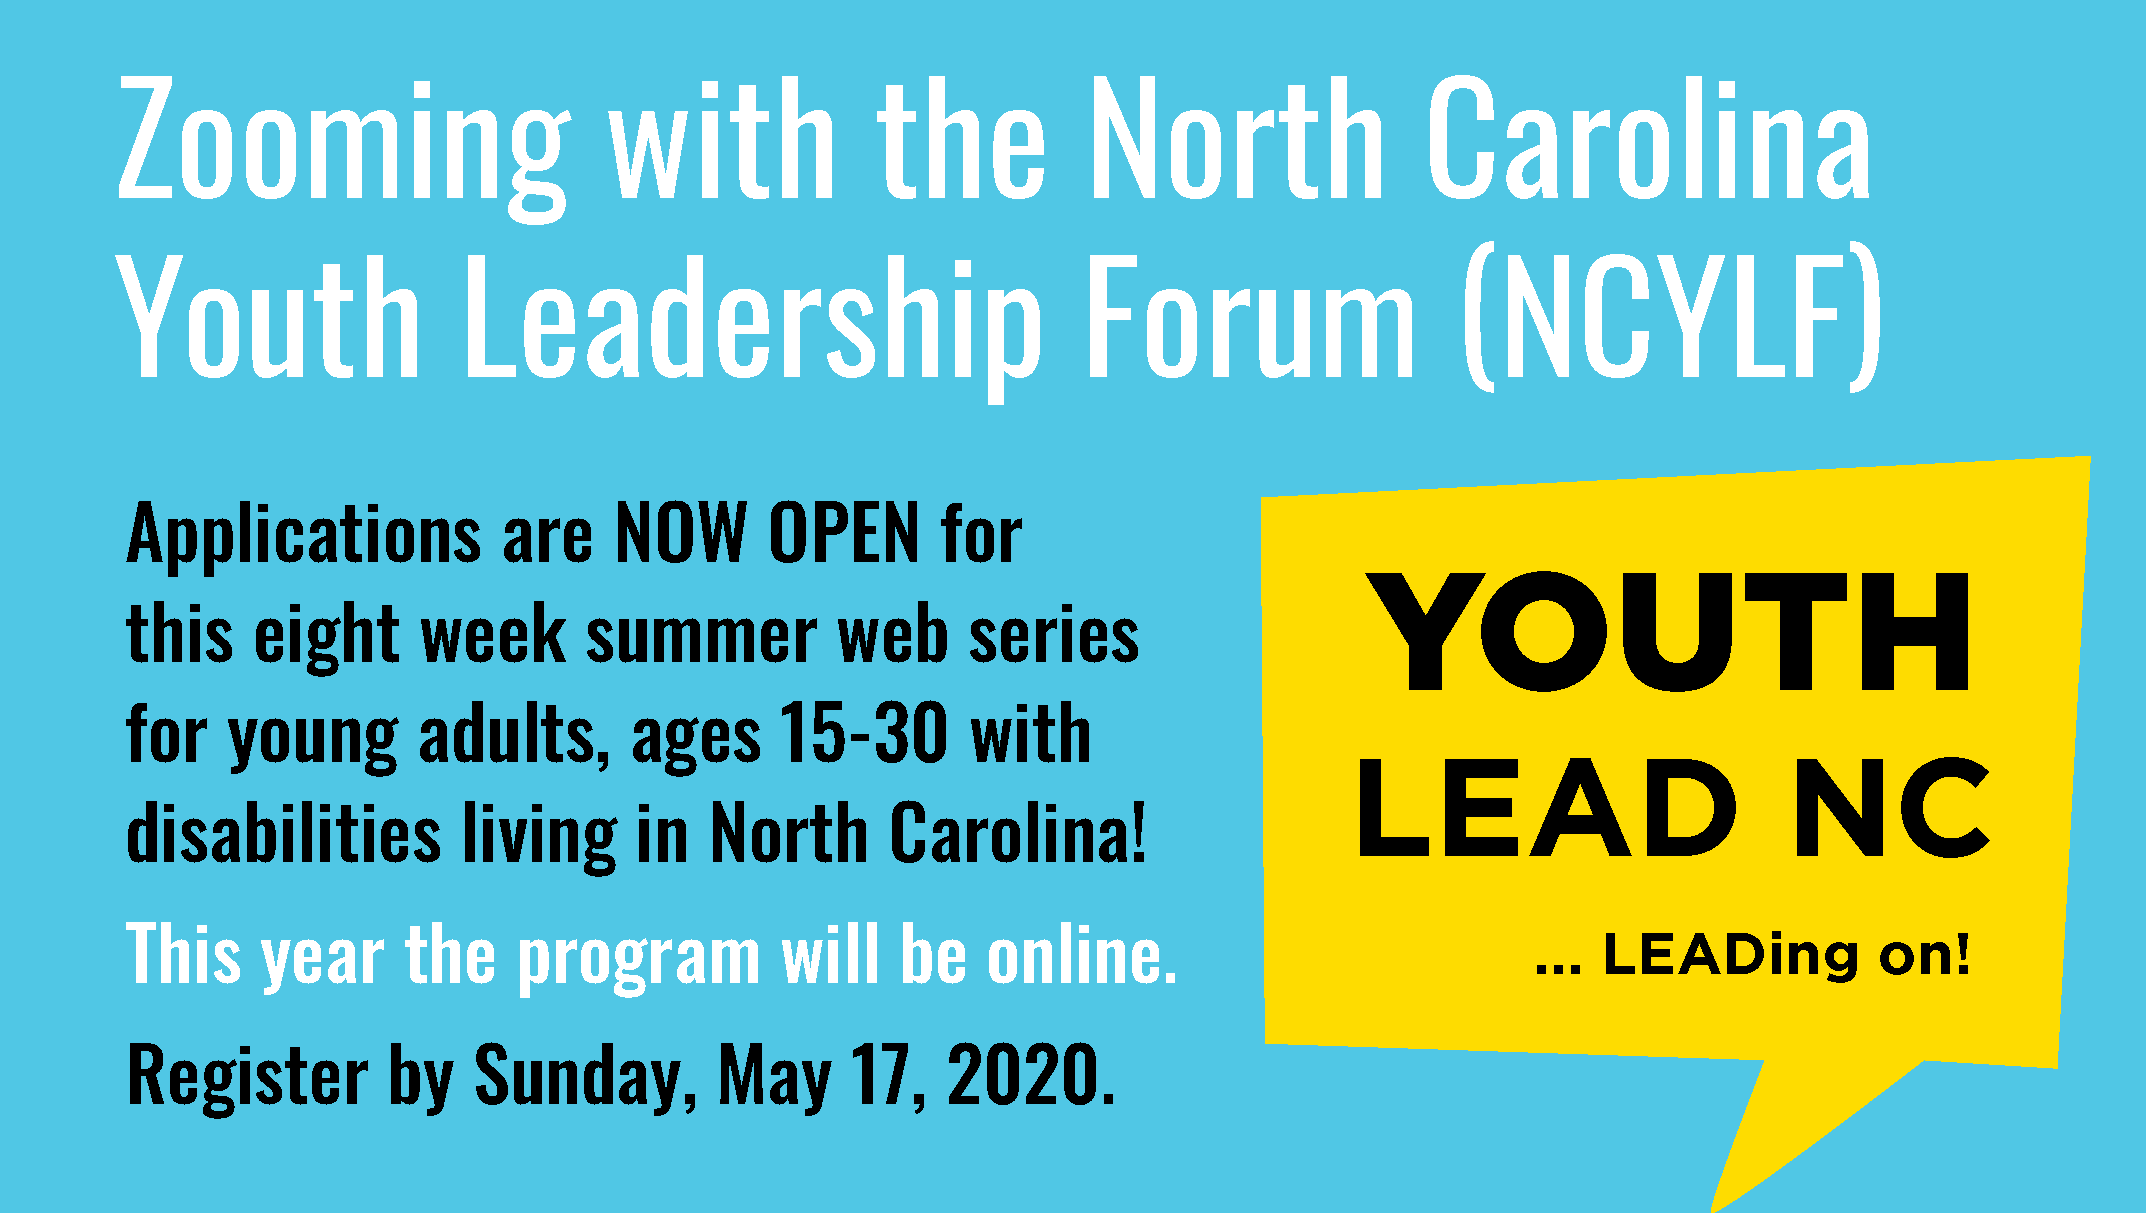 YouthLeadNC